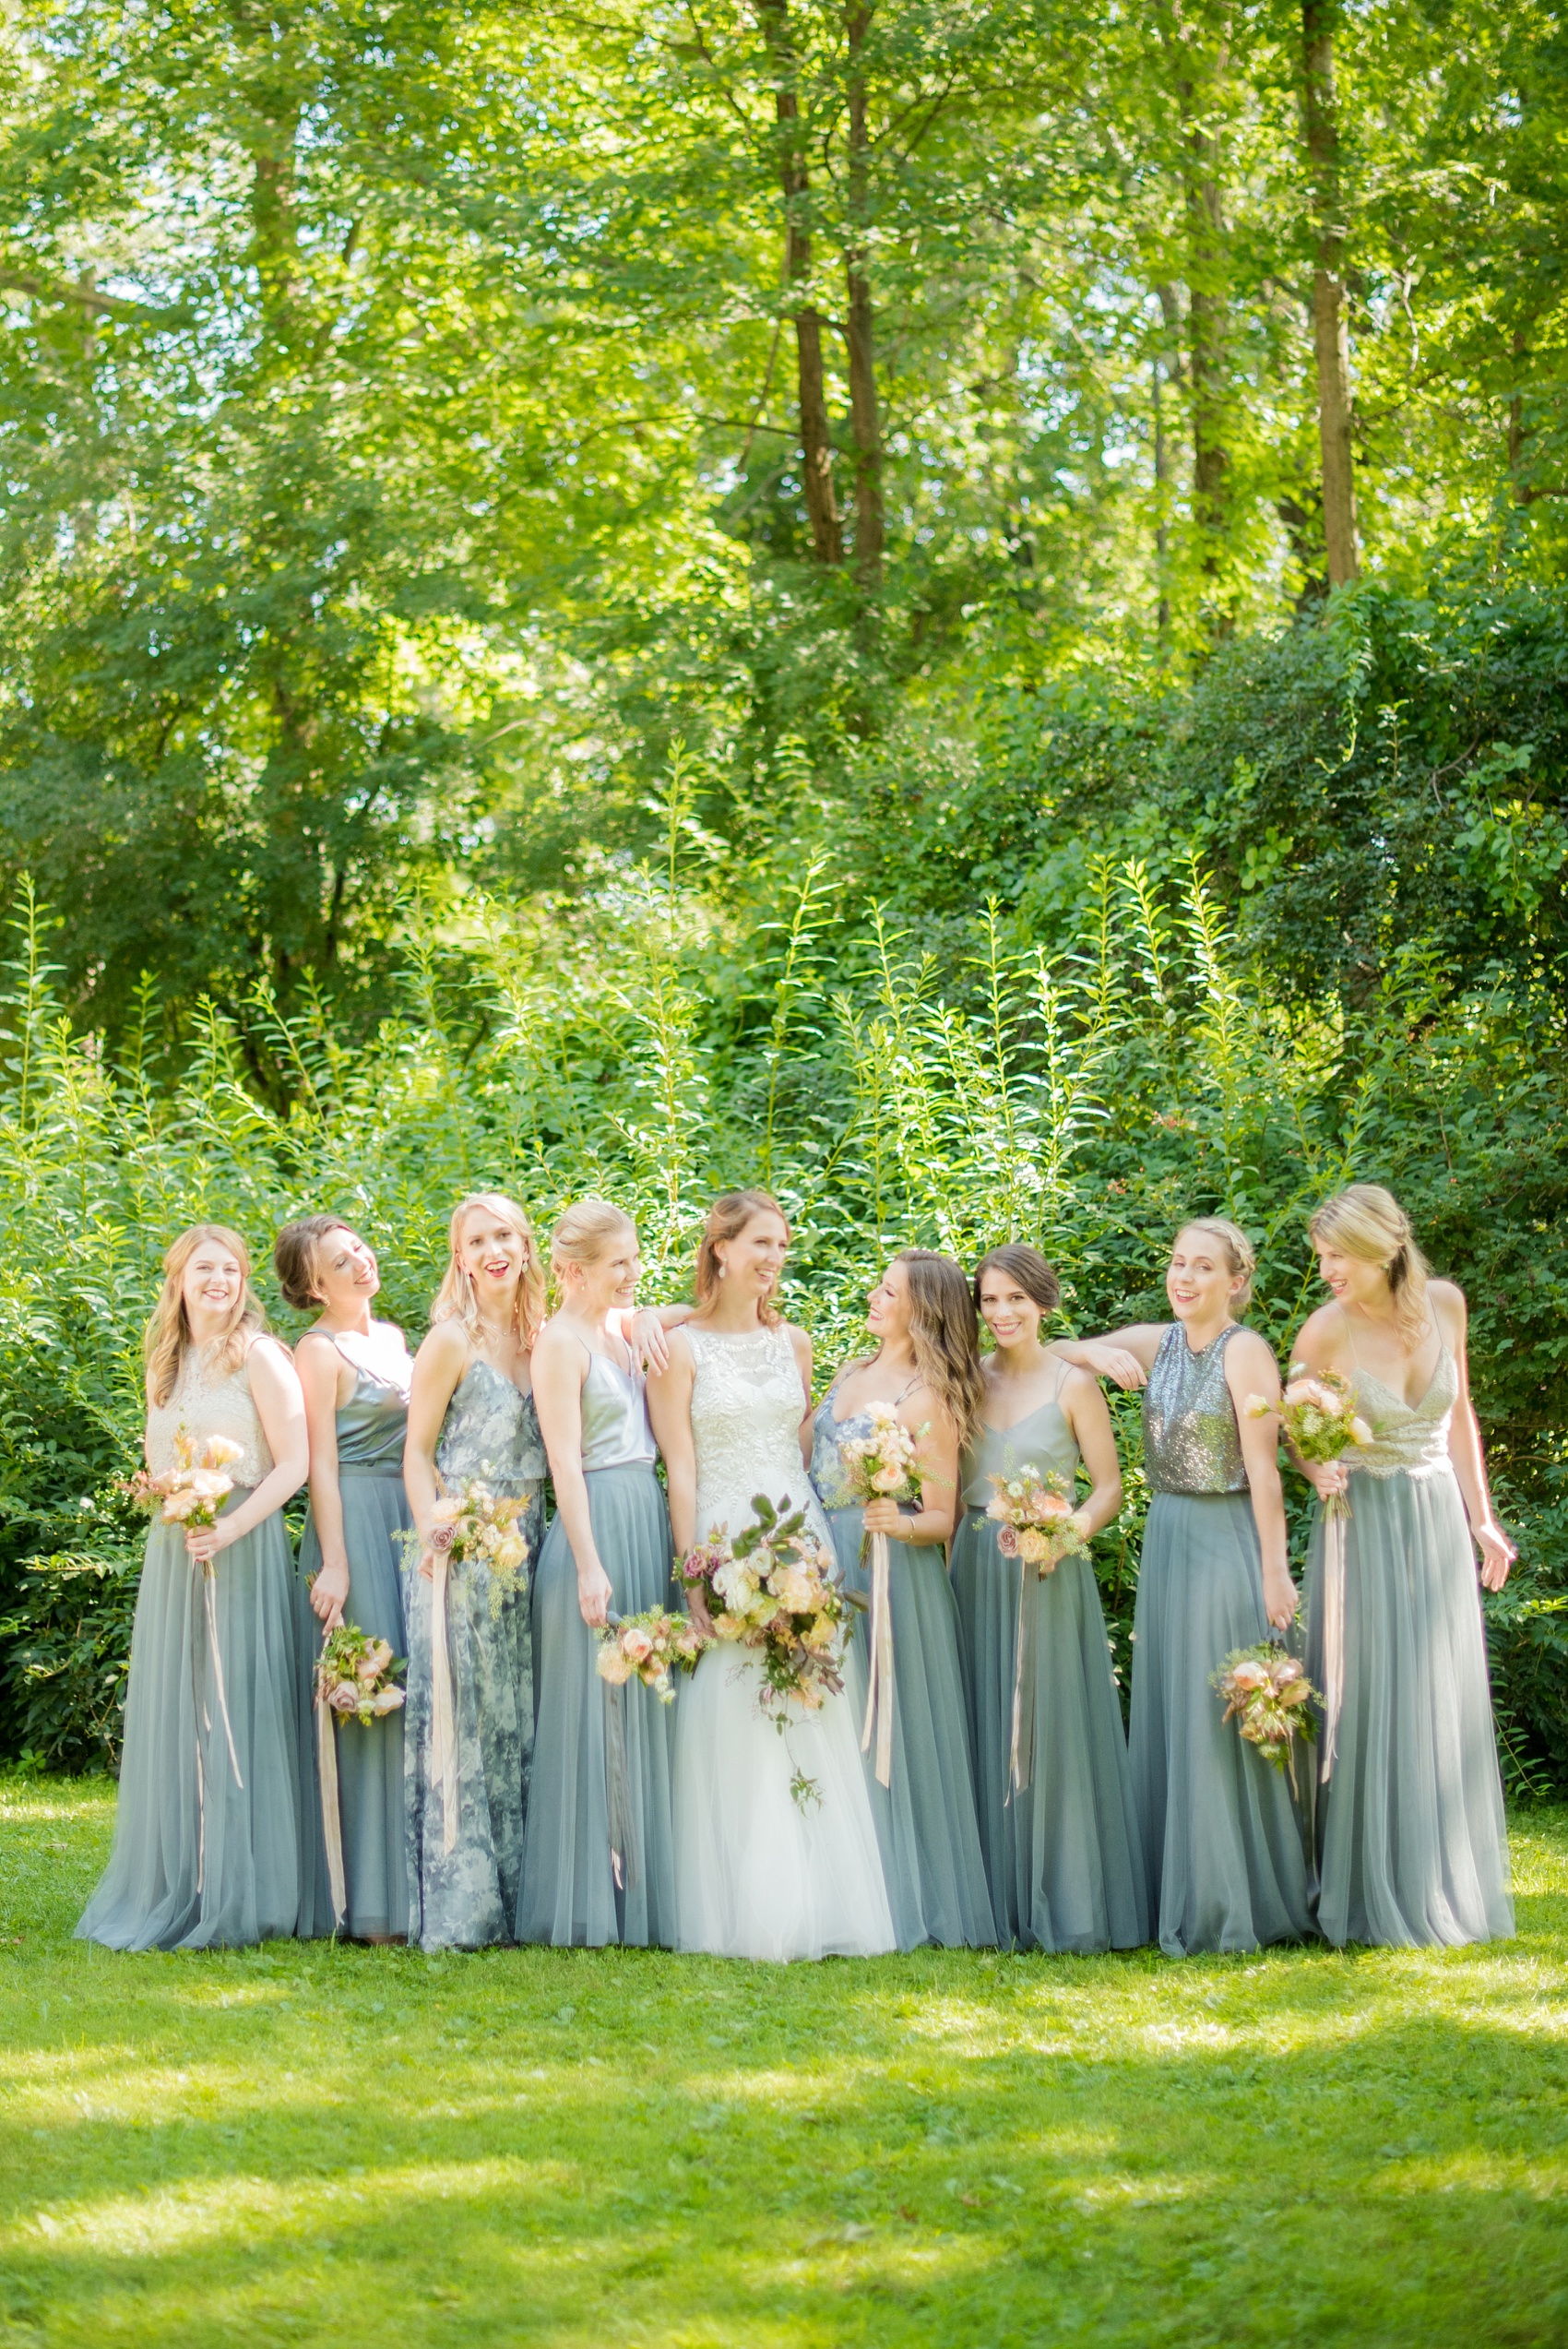 Mikkel Paige Photography photos from a Southwood Estate Wedding in Germantown, New York in the Hudson Valley. Creative picture of the bride and her bridal party. Her bridesmaids wore cornflower blue skirts with mismatched tops.